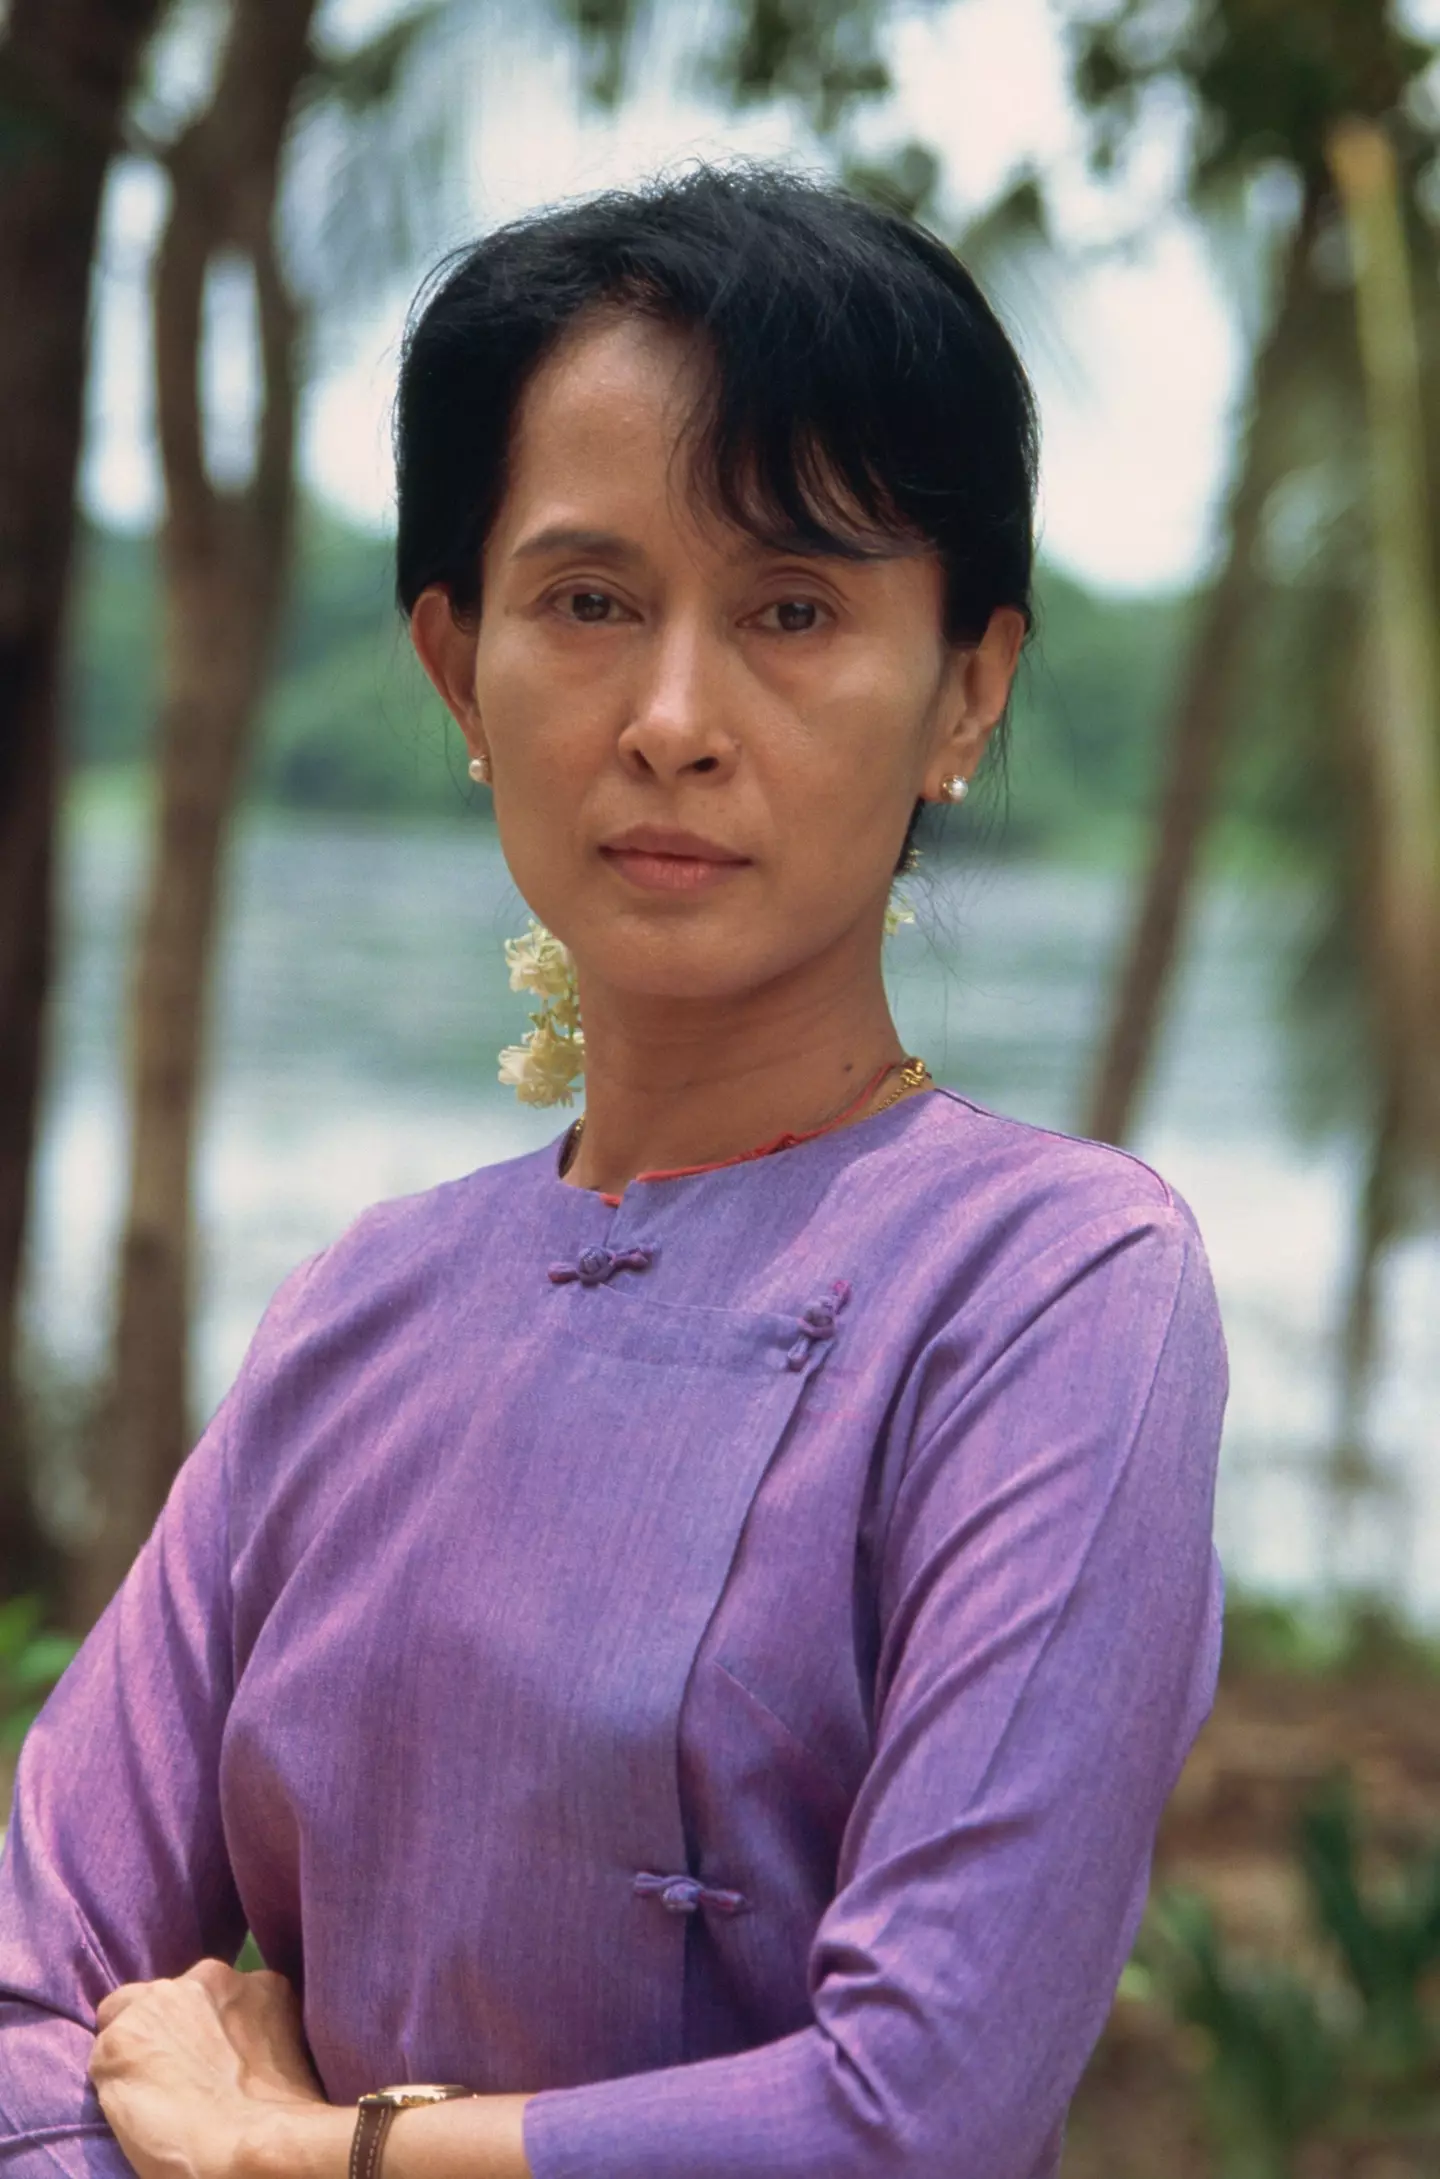 Suu Kyi was given a Nobel Peace Prize in 1991.